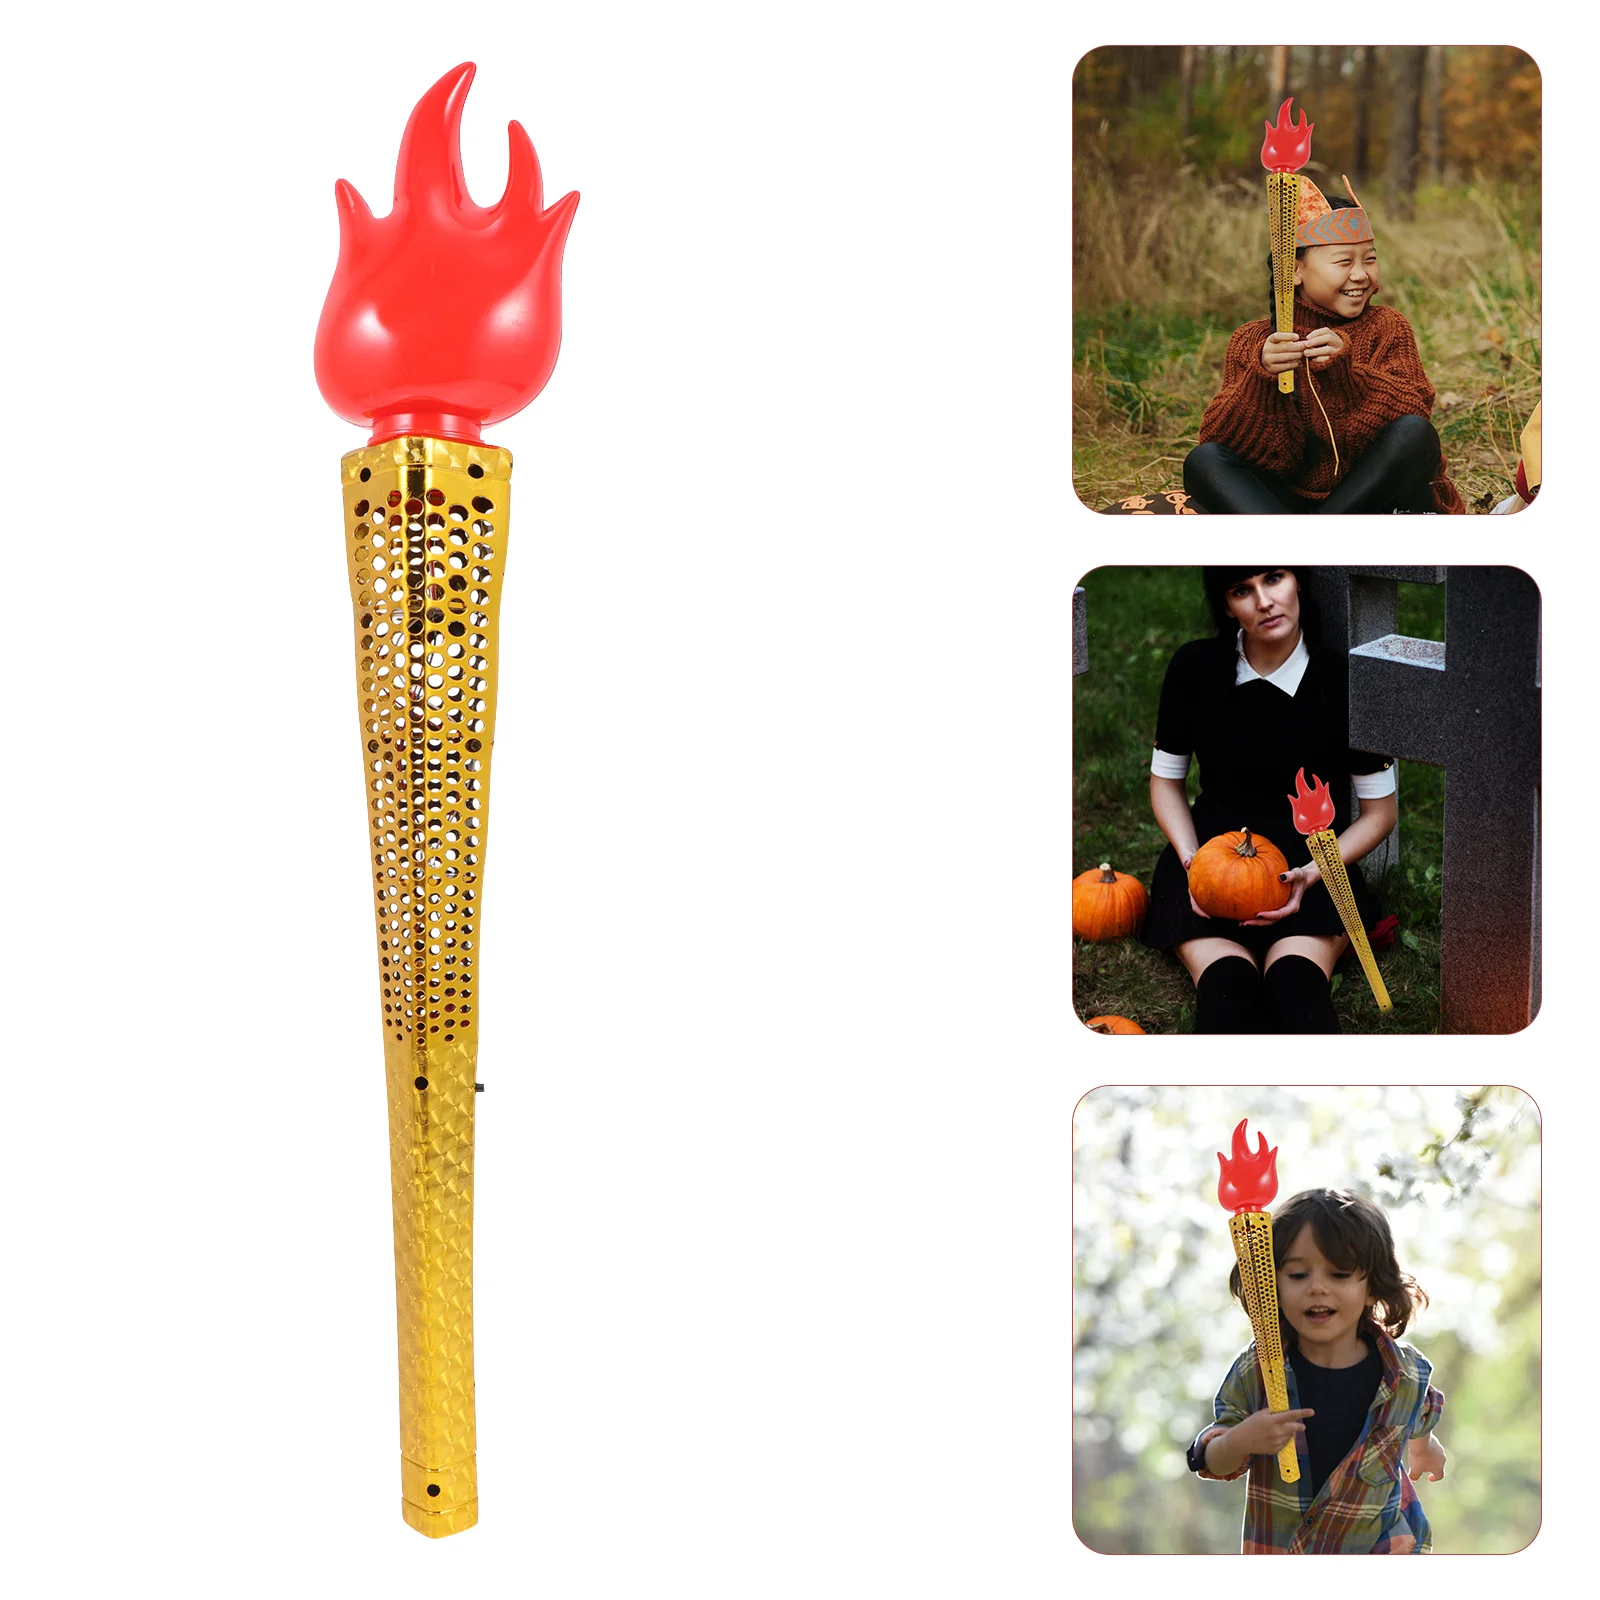 

Torch Torches Toy Fake Fire Flame Kids Party Inflatablecampfire Plaything Glowing Artificial Supplies Fun Simulation Prop